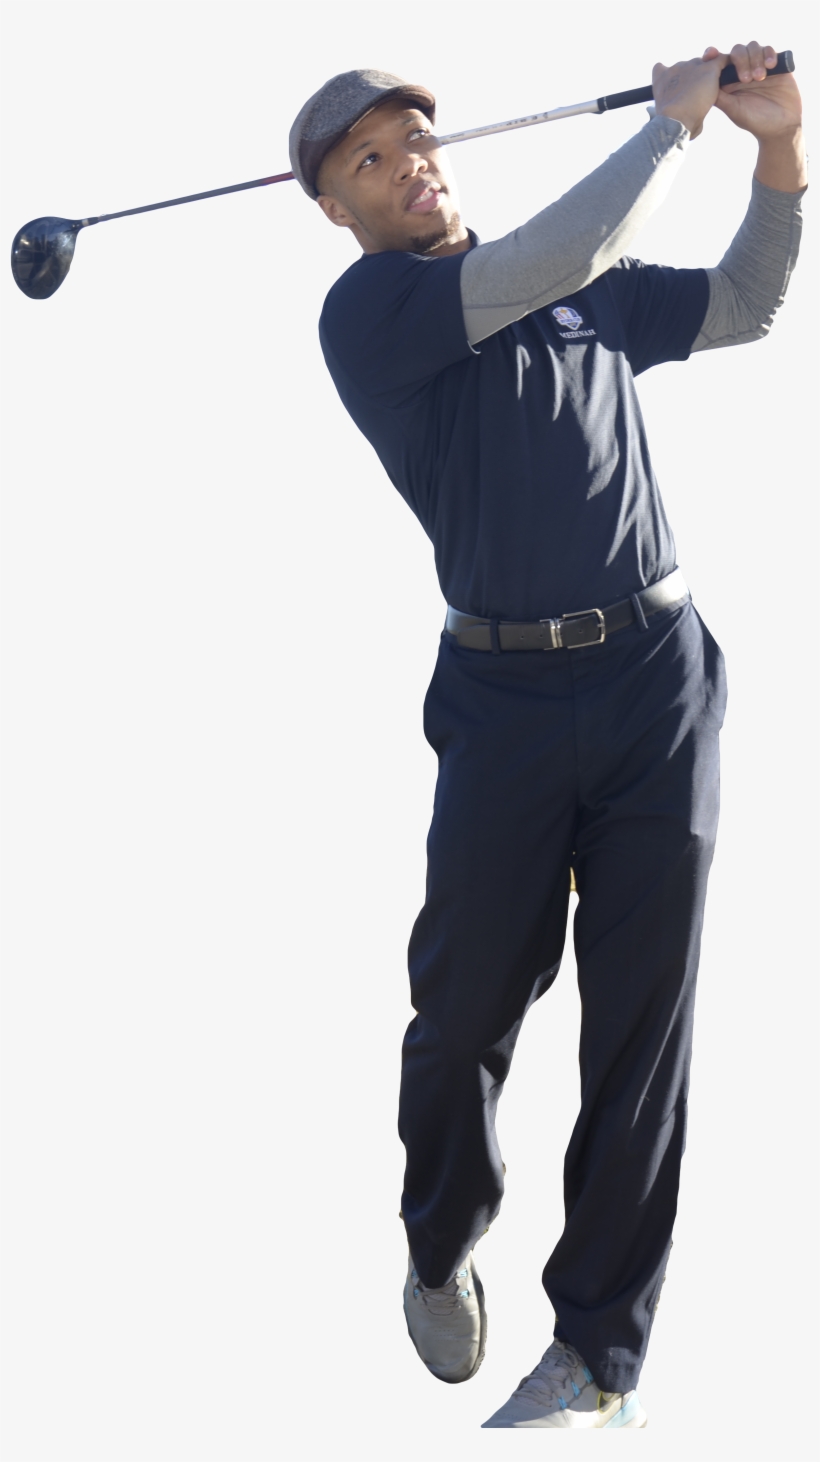 Realizing The Dream - Golfer Cut Out Png, transparent png #1684026